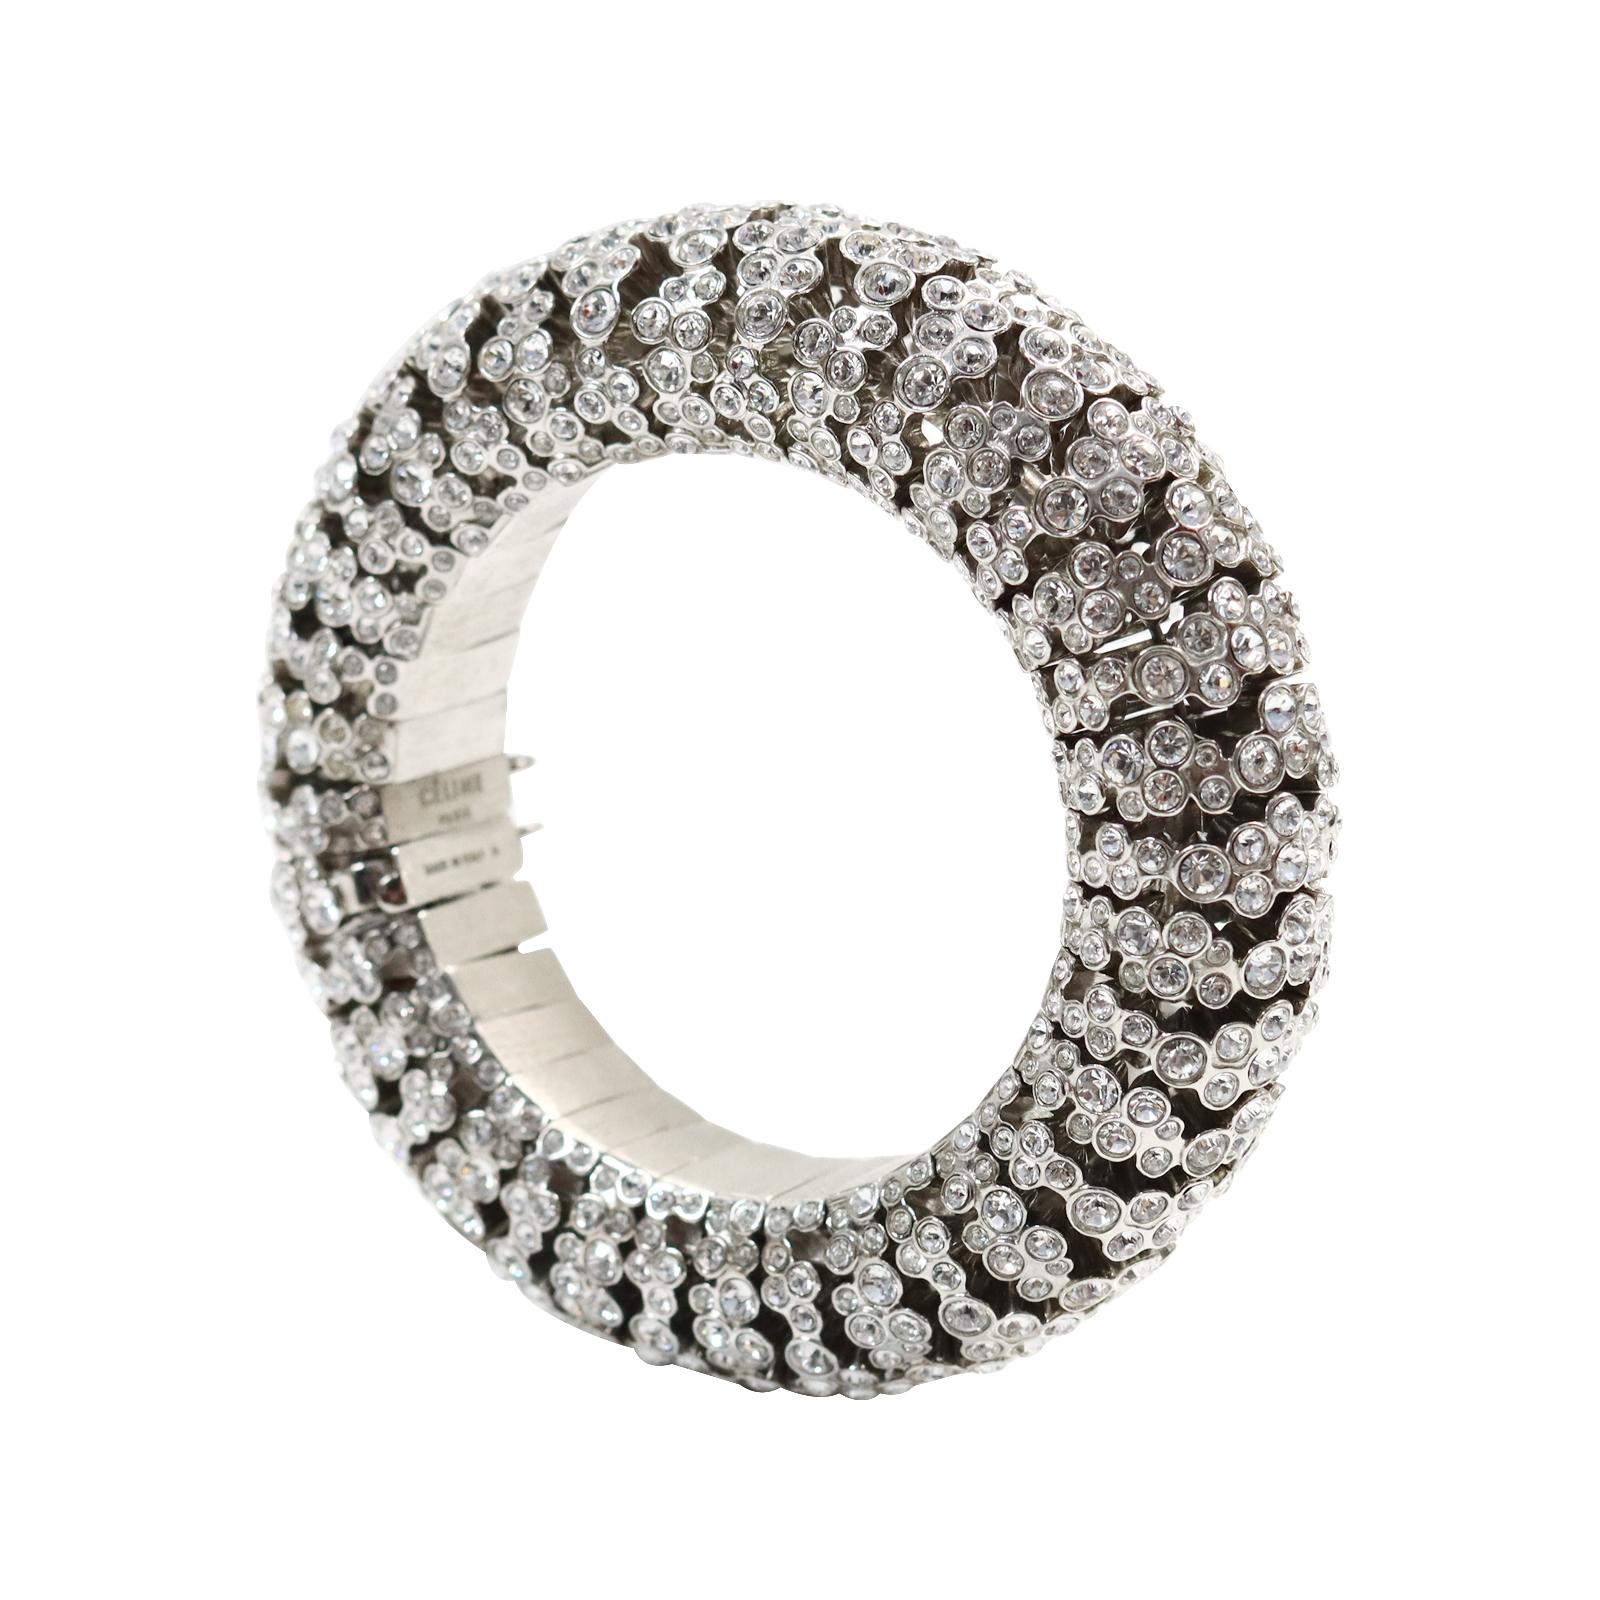 Collectible Celine Diamante Domed Bracelet Circa 2000s In Excellent Condition For Sale In New York, NY